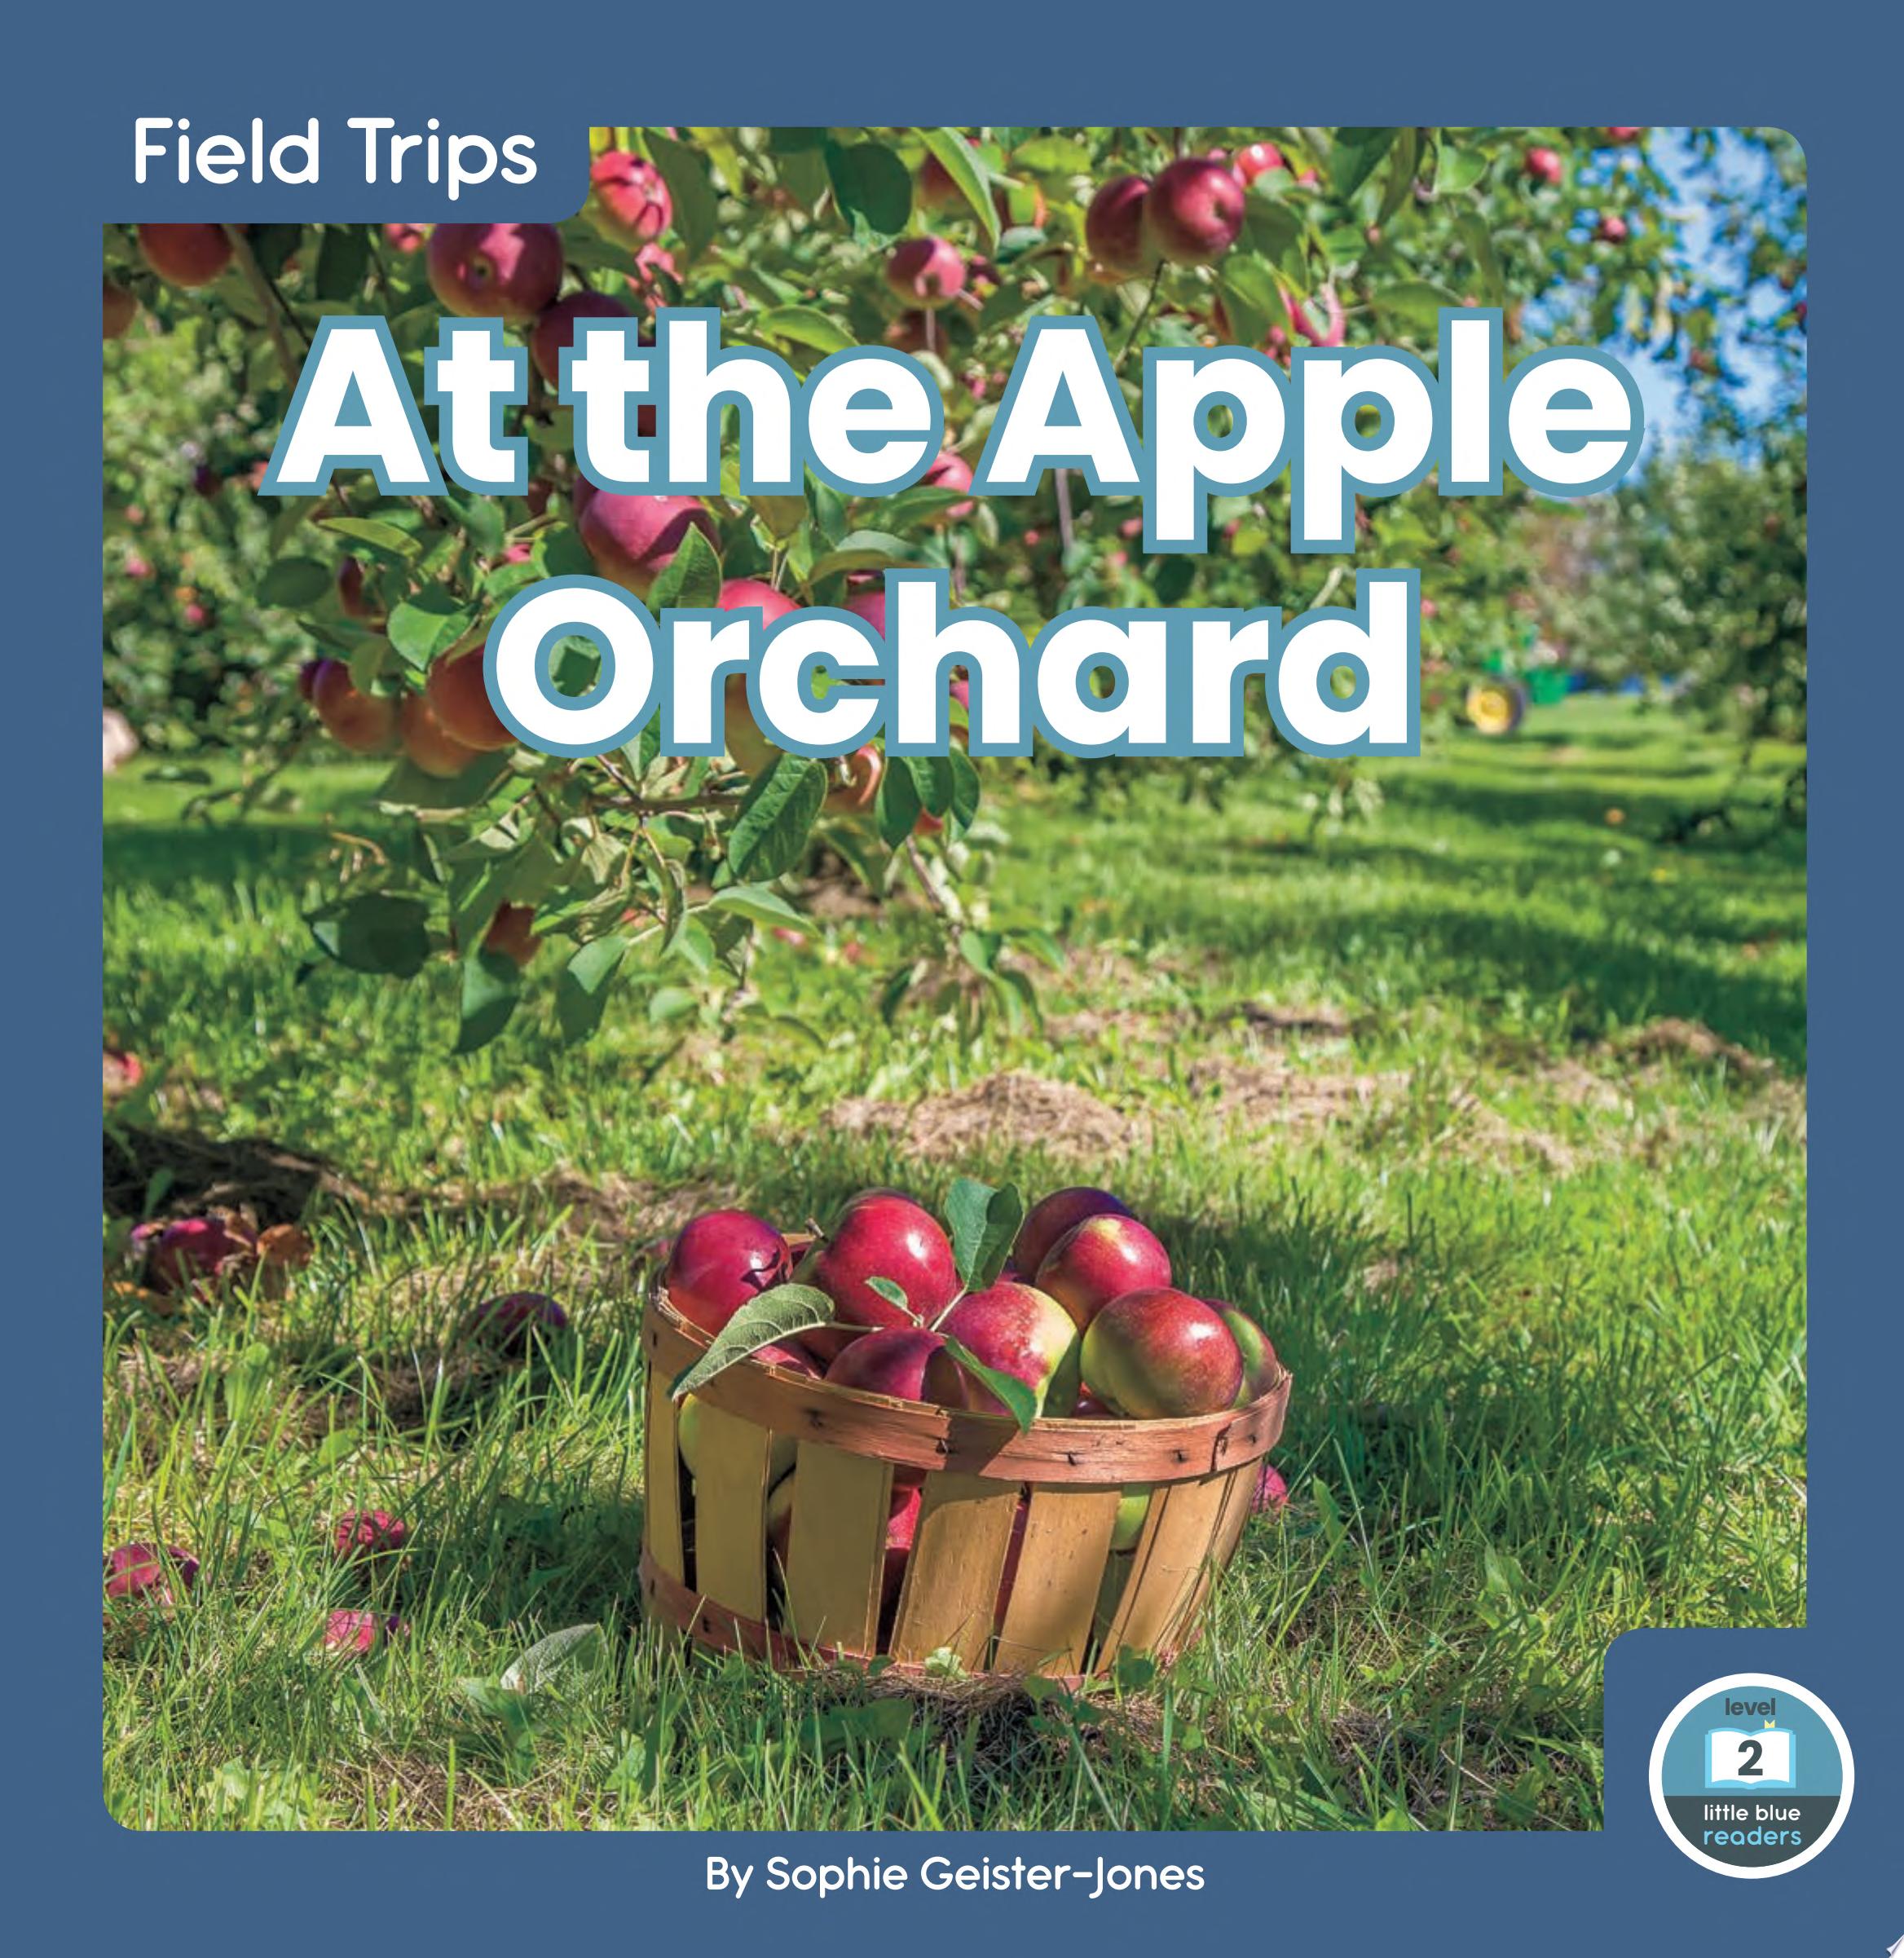 Image for "At the Apple Orchard"